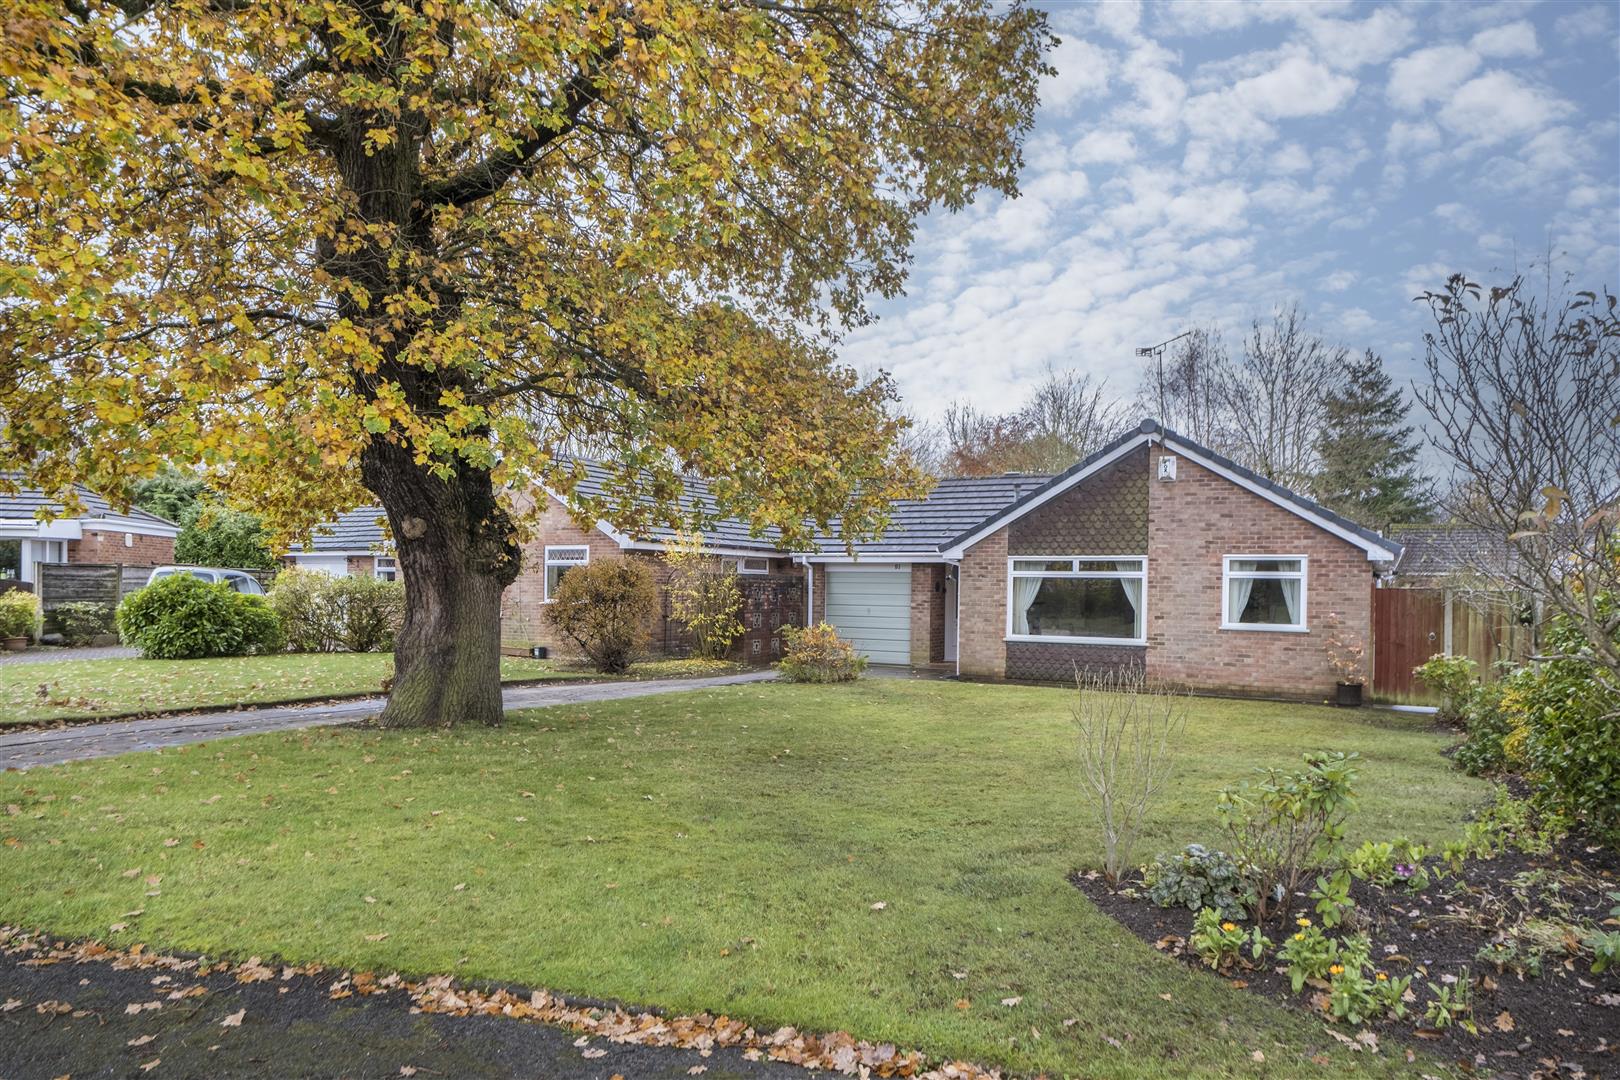 3 bedroom  Detached Bungalow for Sale in Northwich